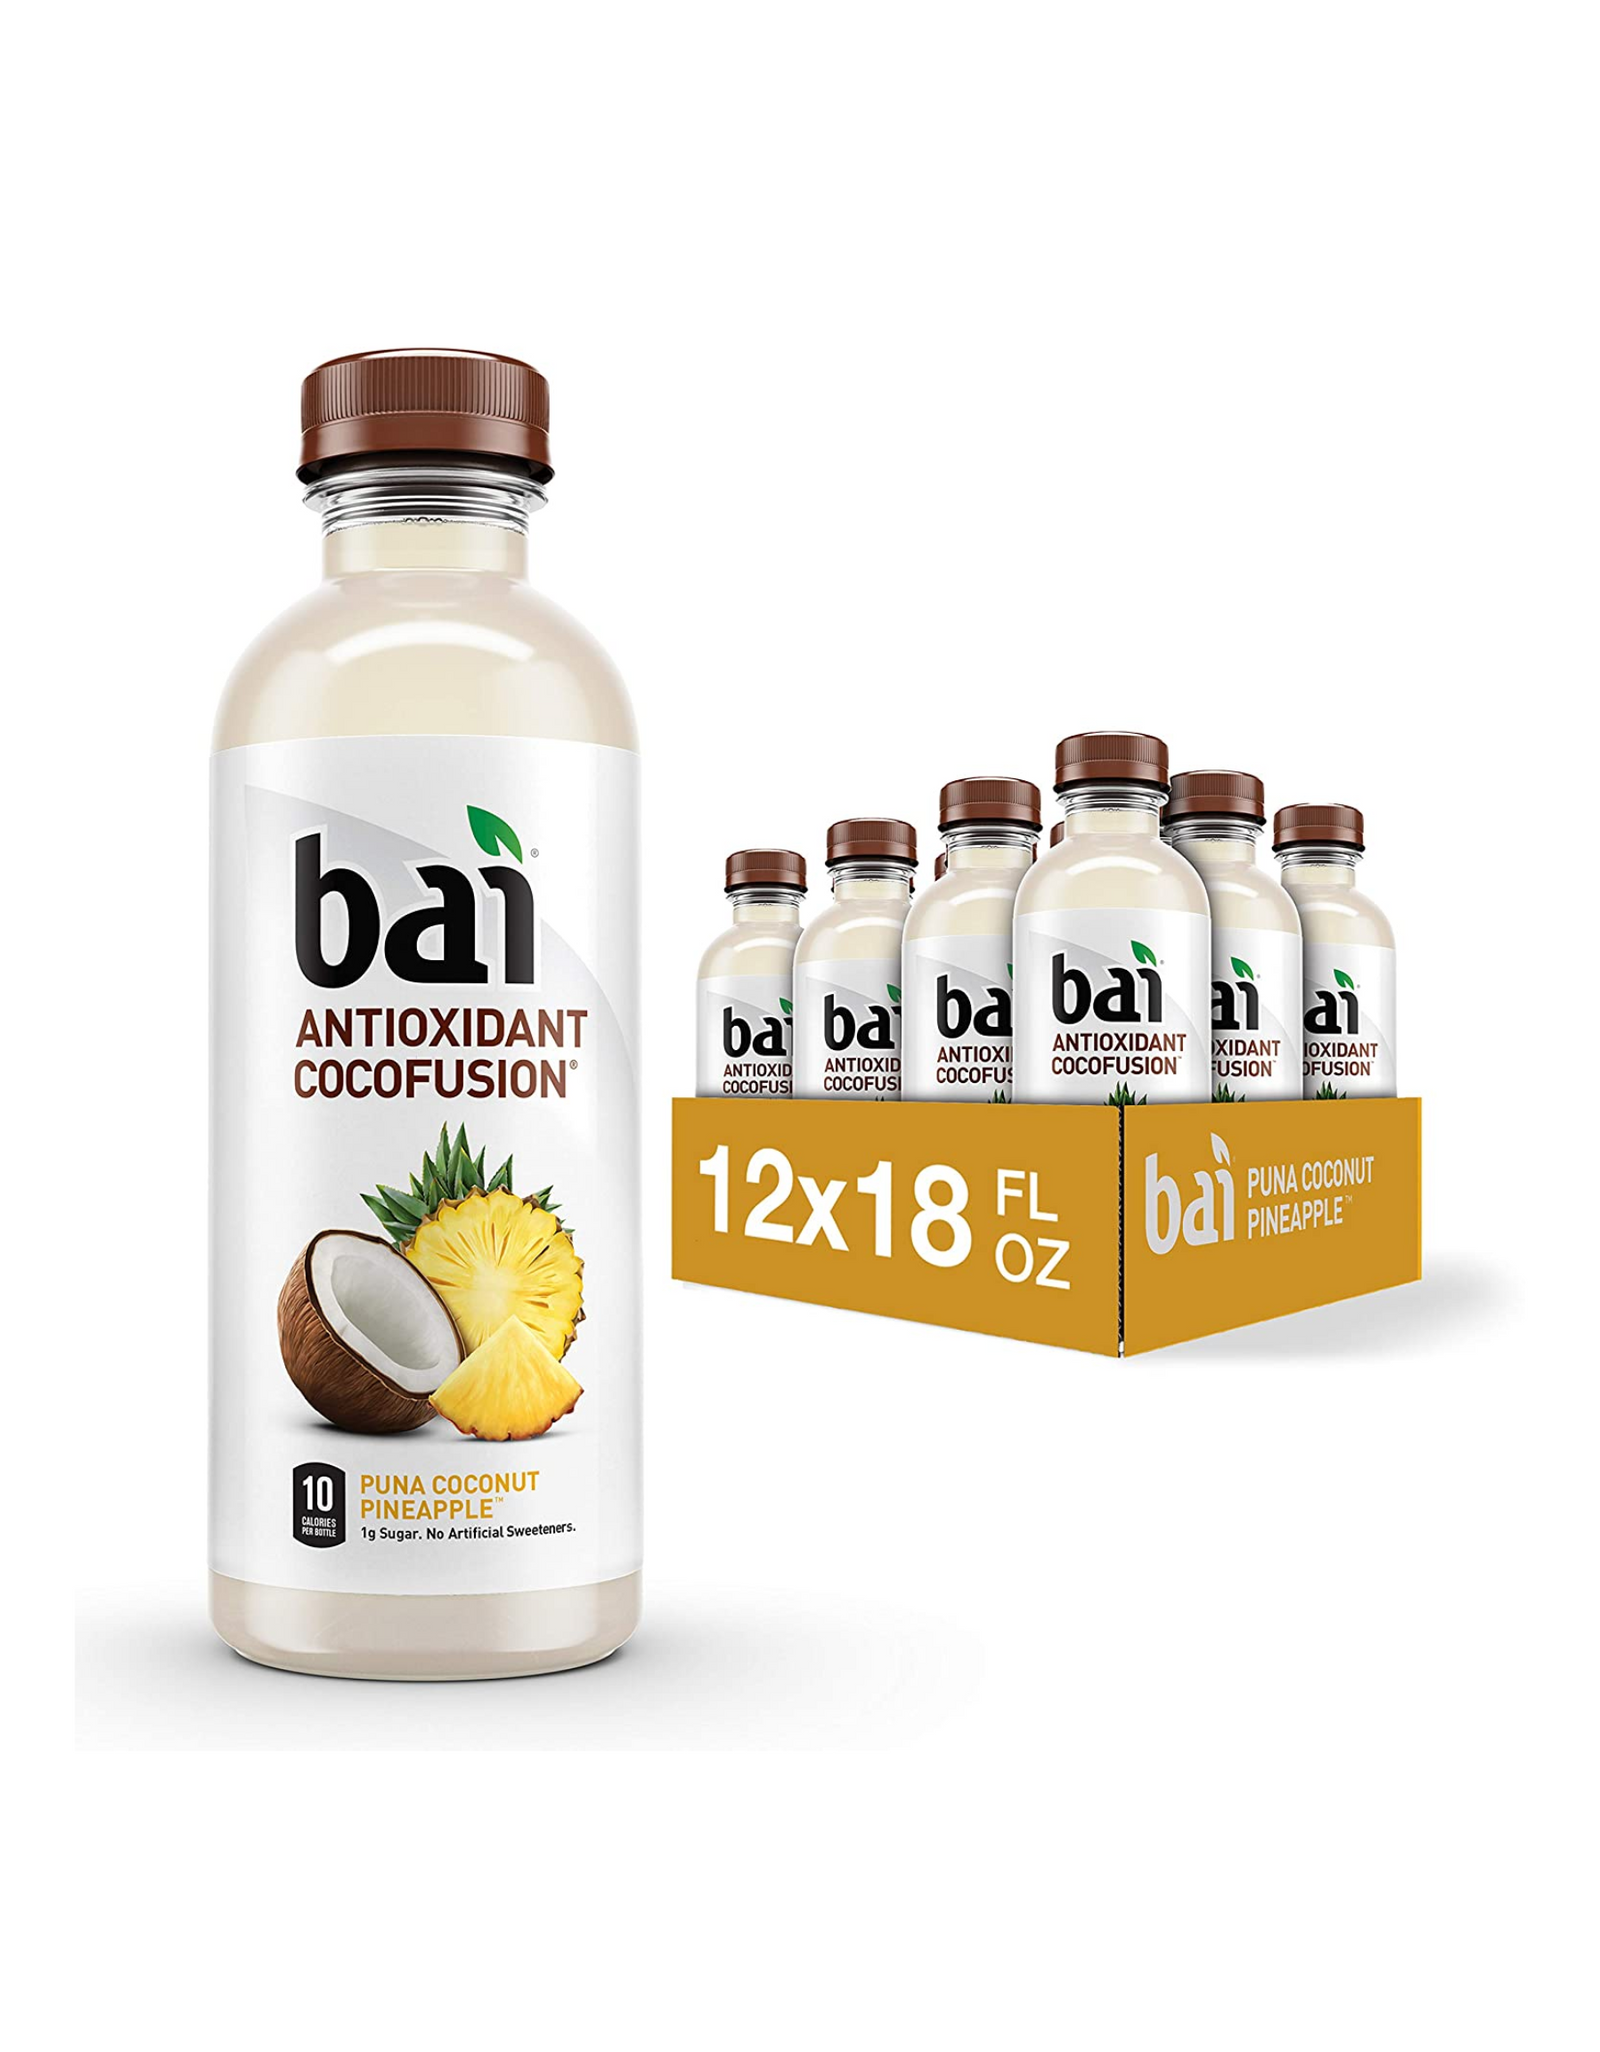 Bai Coconut Flavored Water, Antioxidant Cocofusion, Puna Coconut Pineapple, 18 fl oz (Pack of 12)